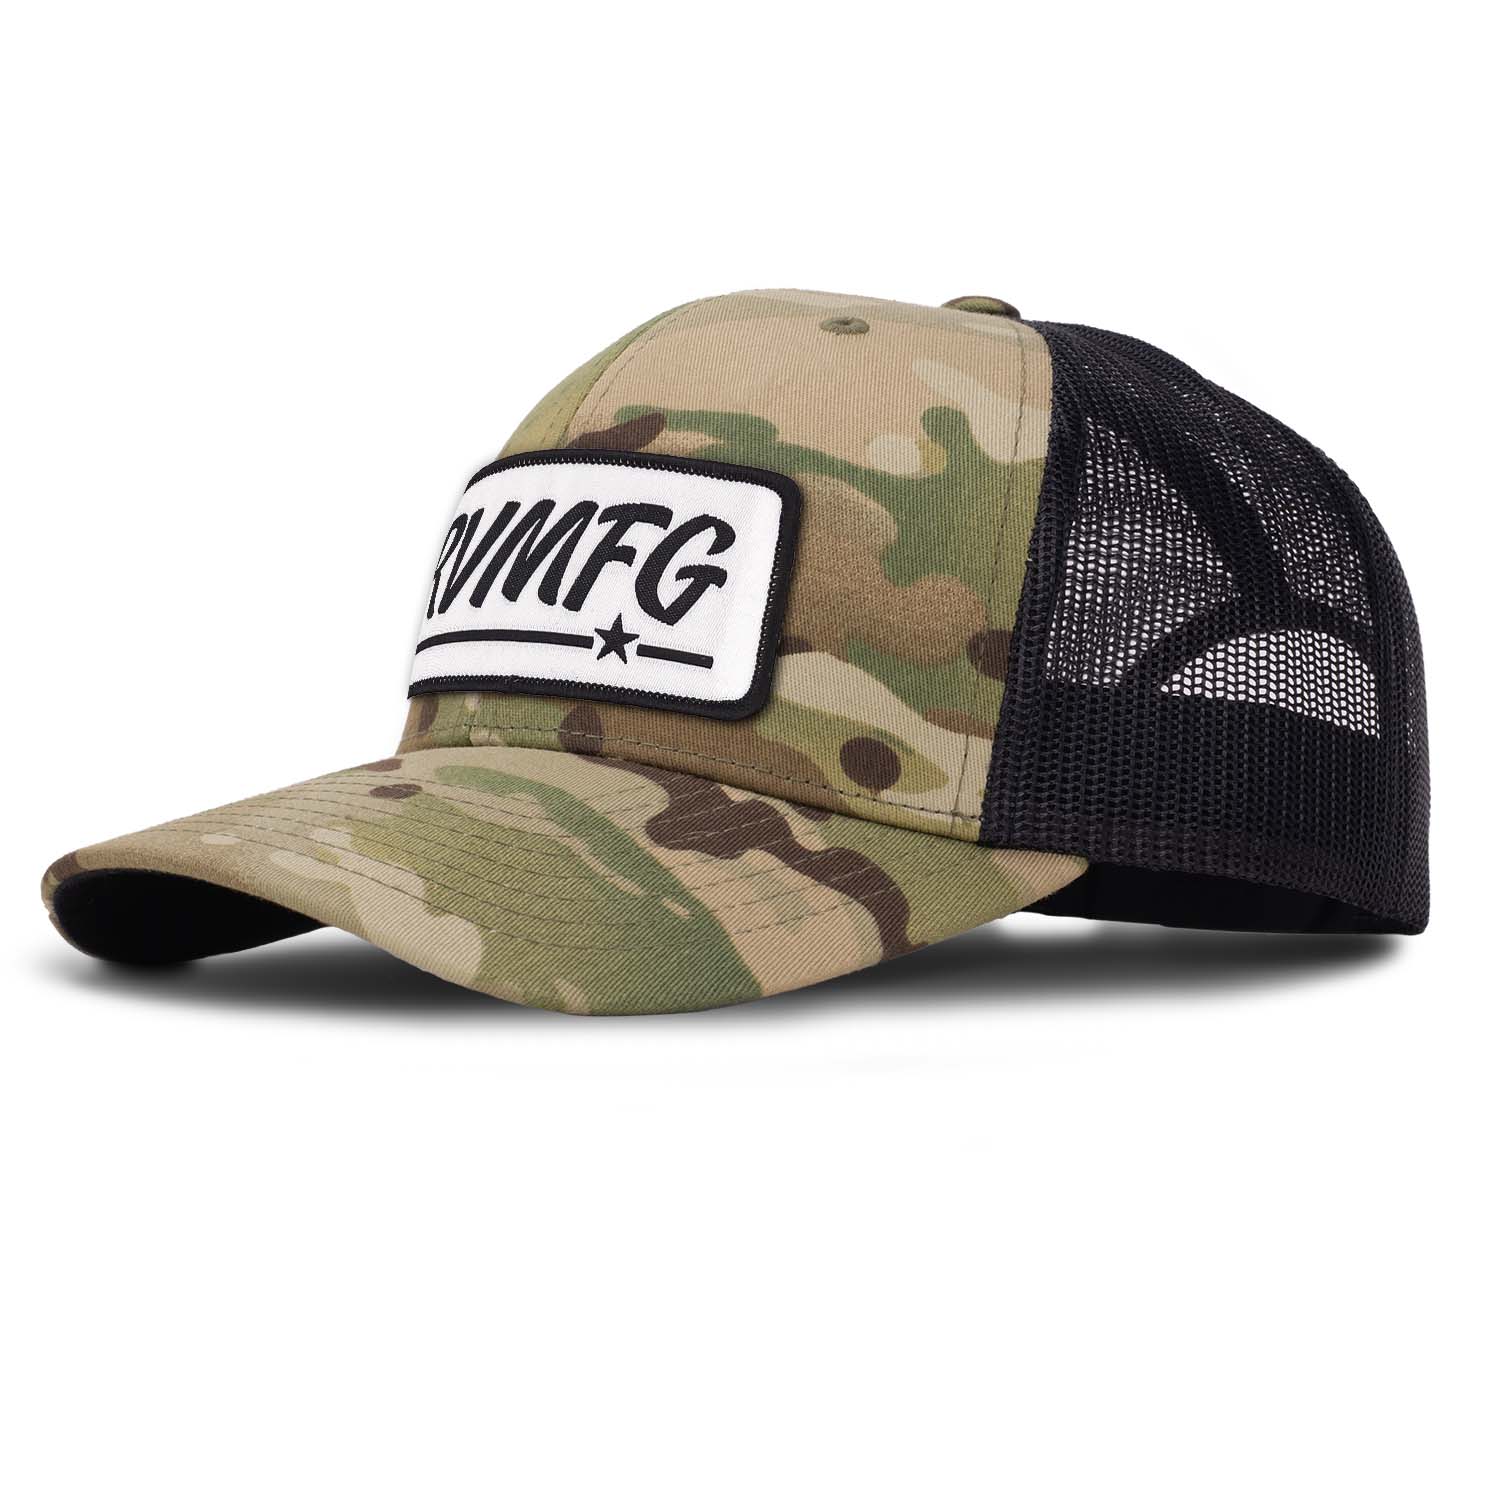 Revolution Mfg classic trucker hat in multicam camo with black mesh with a white woven RVMFG patch with black letters and a black border